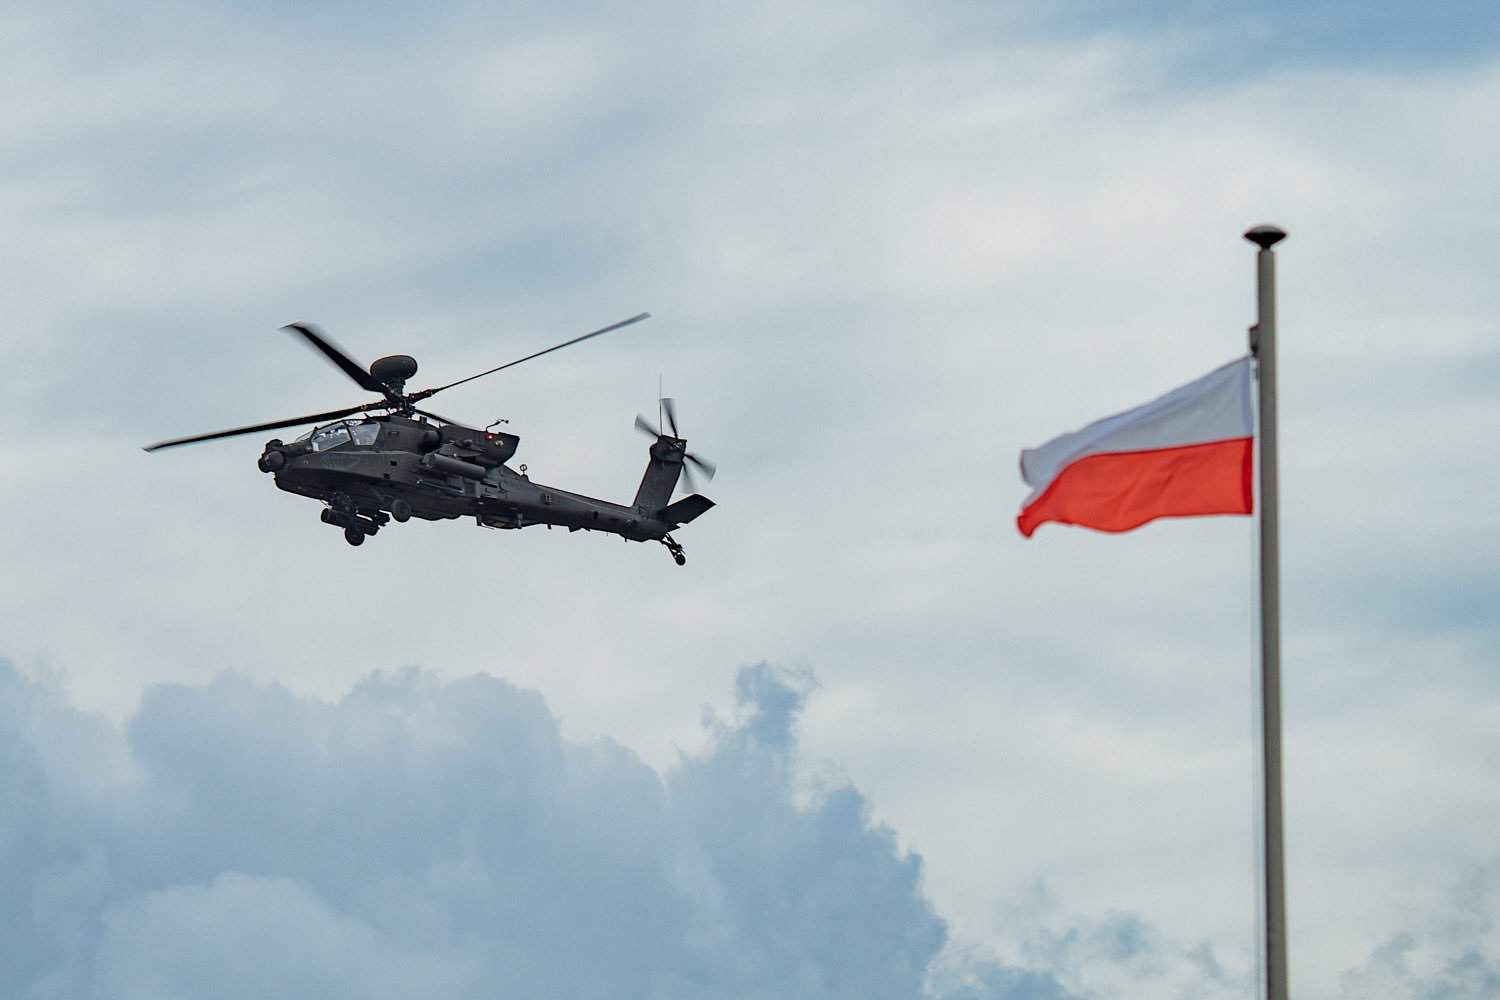 Poland to start servicing its AH-64E Apache helicopters independently